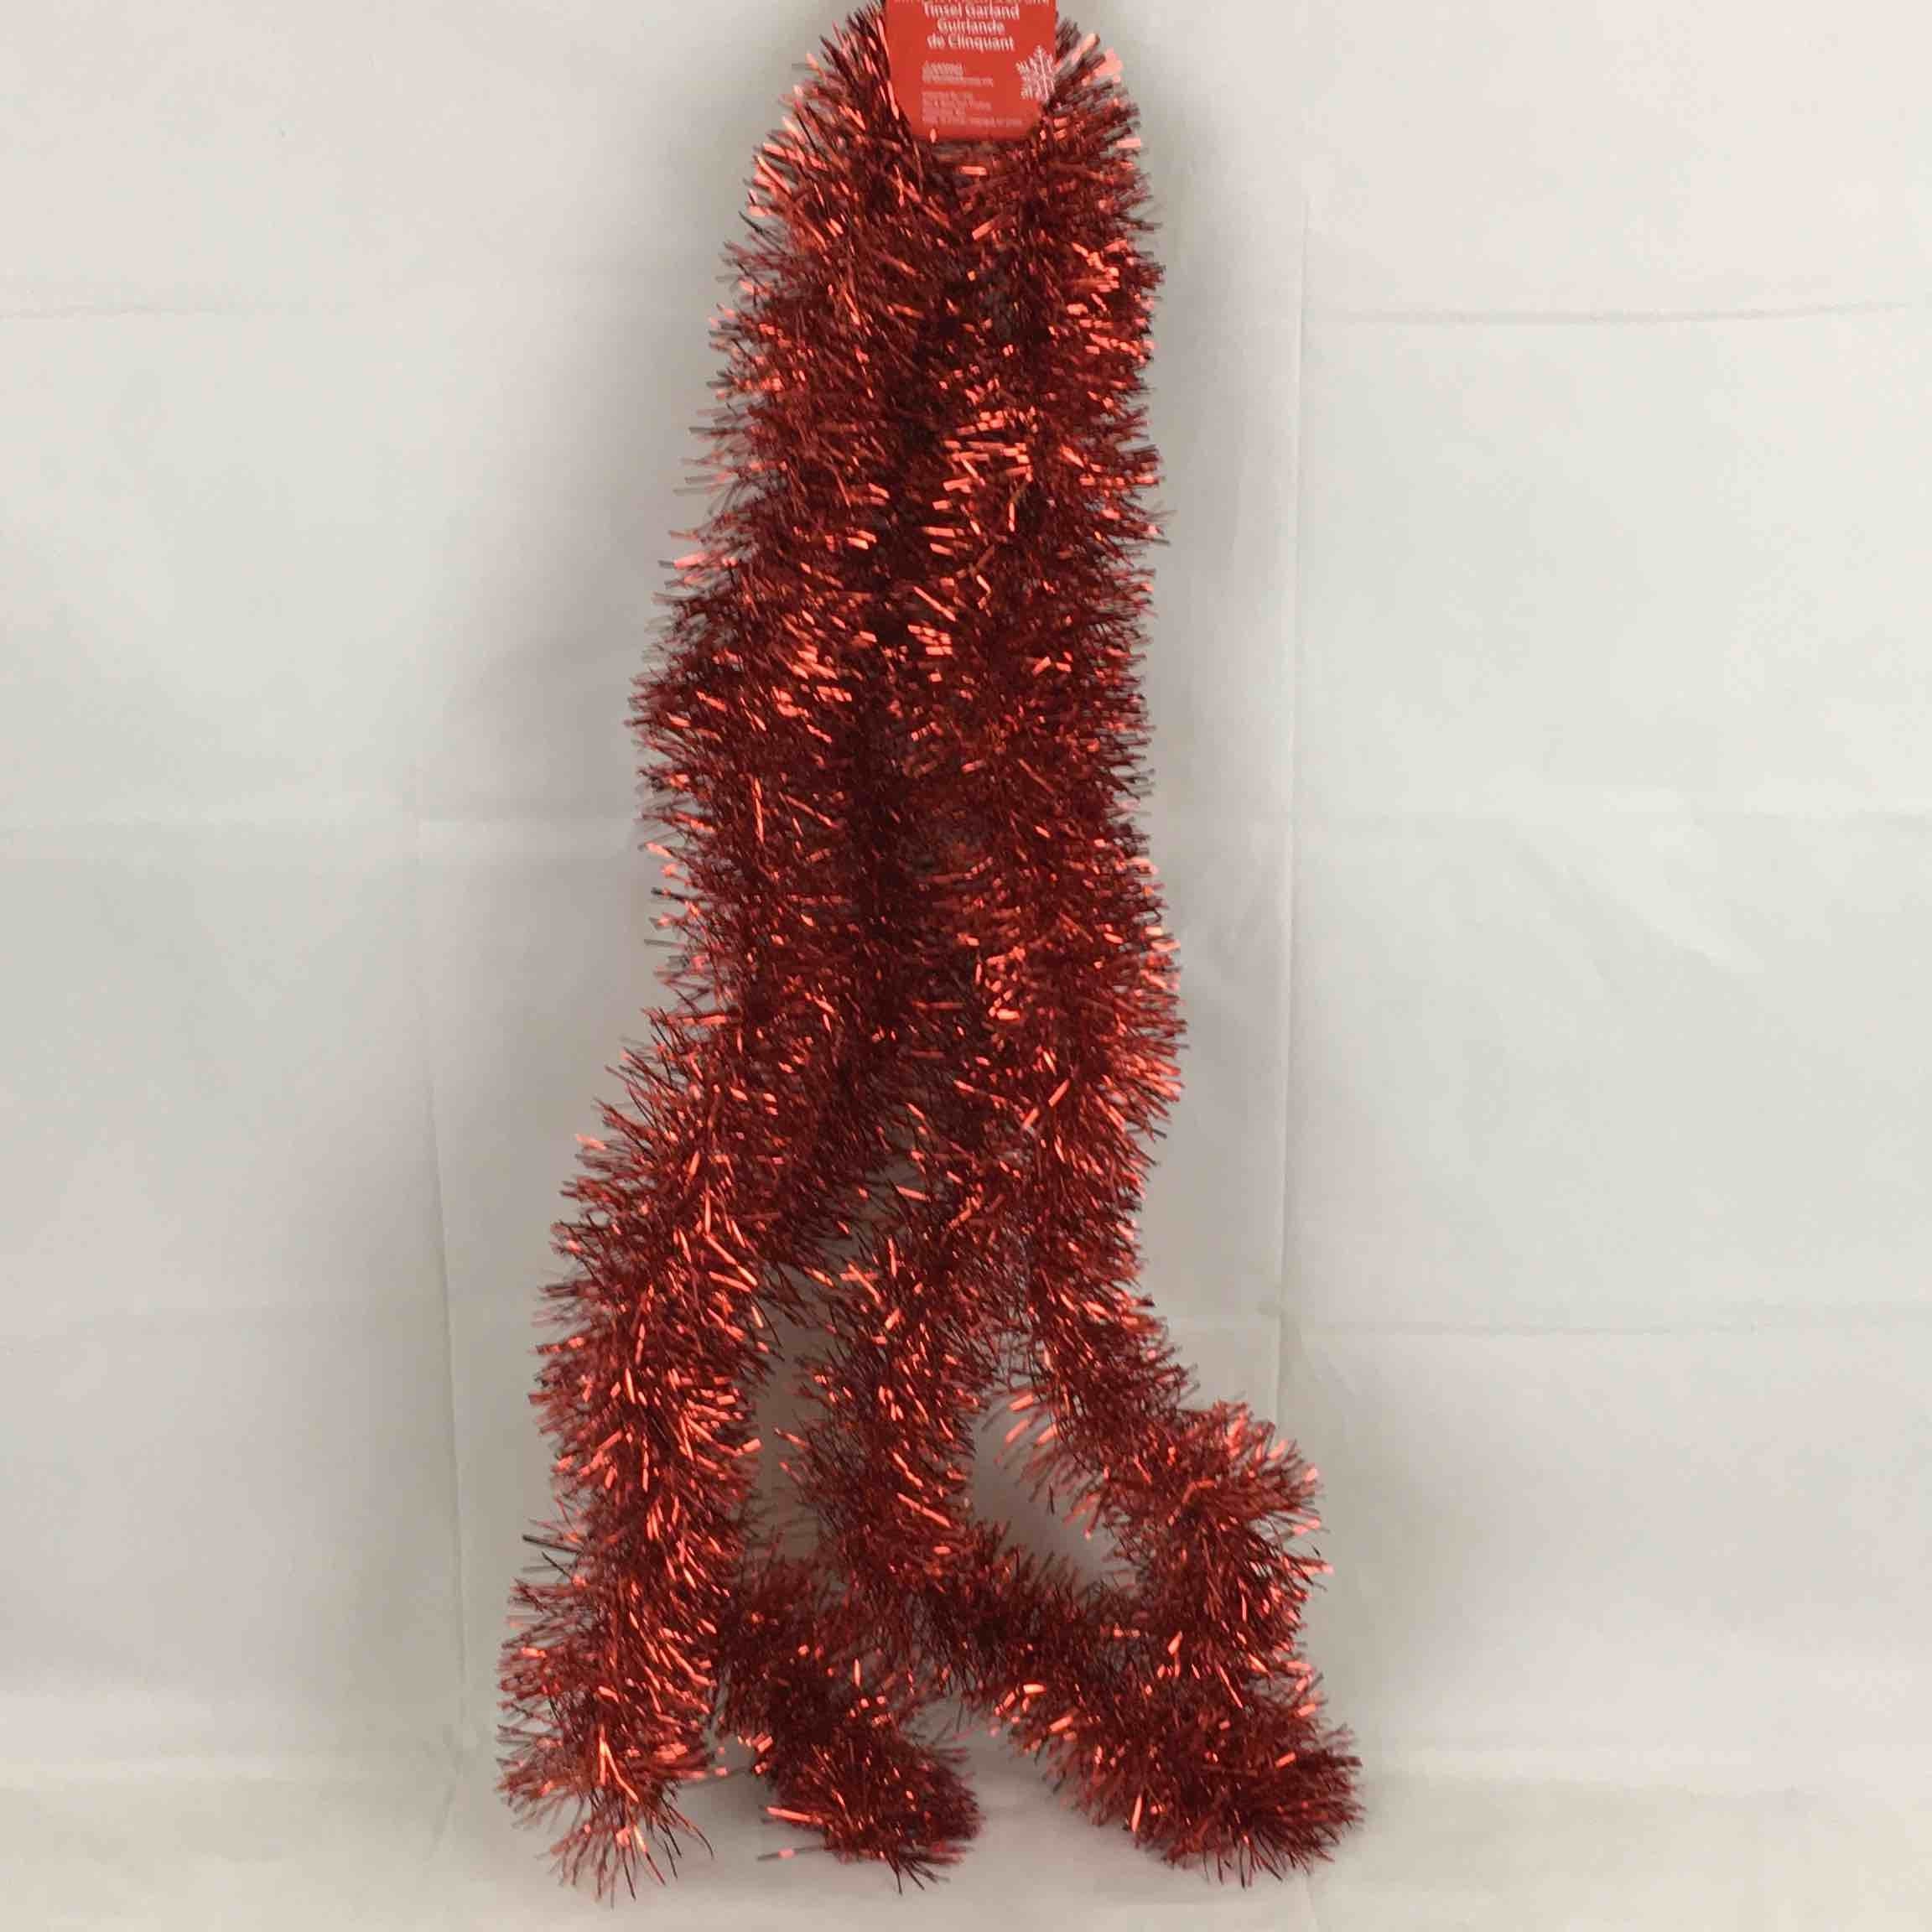 CMAS FOIL DECOR Tinsel Garland 4ply Red